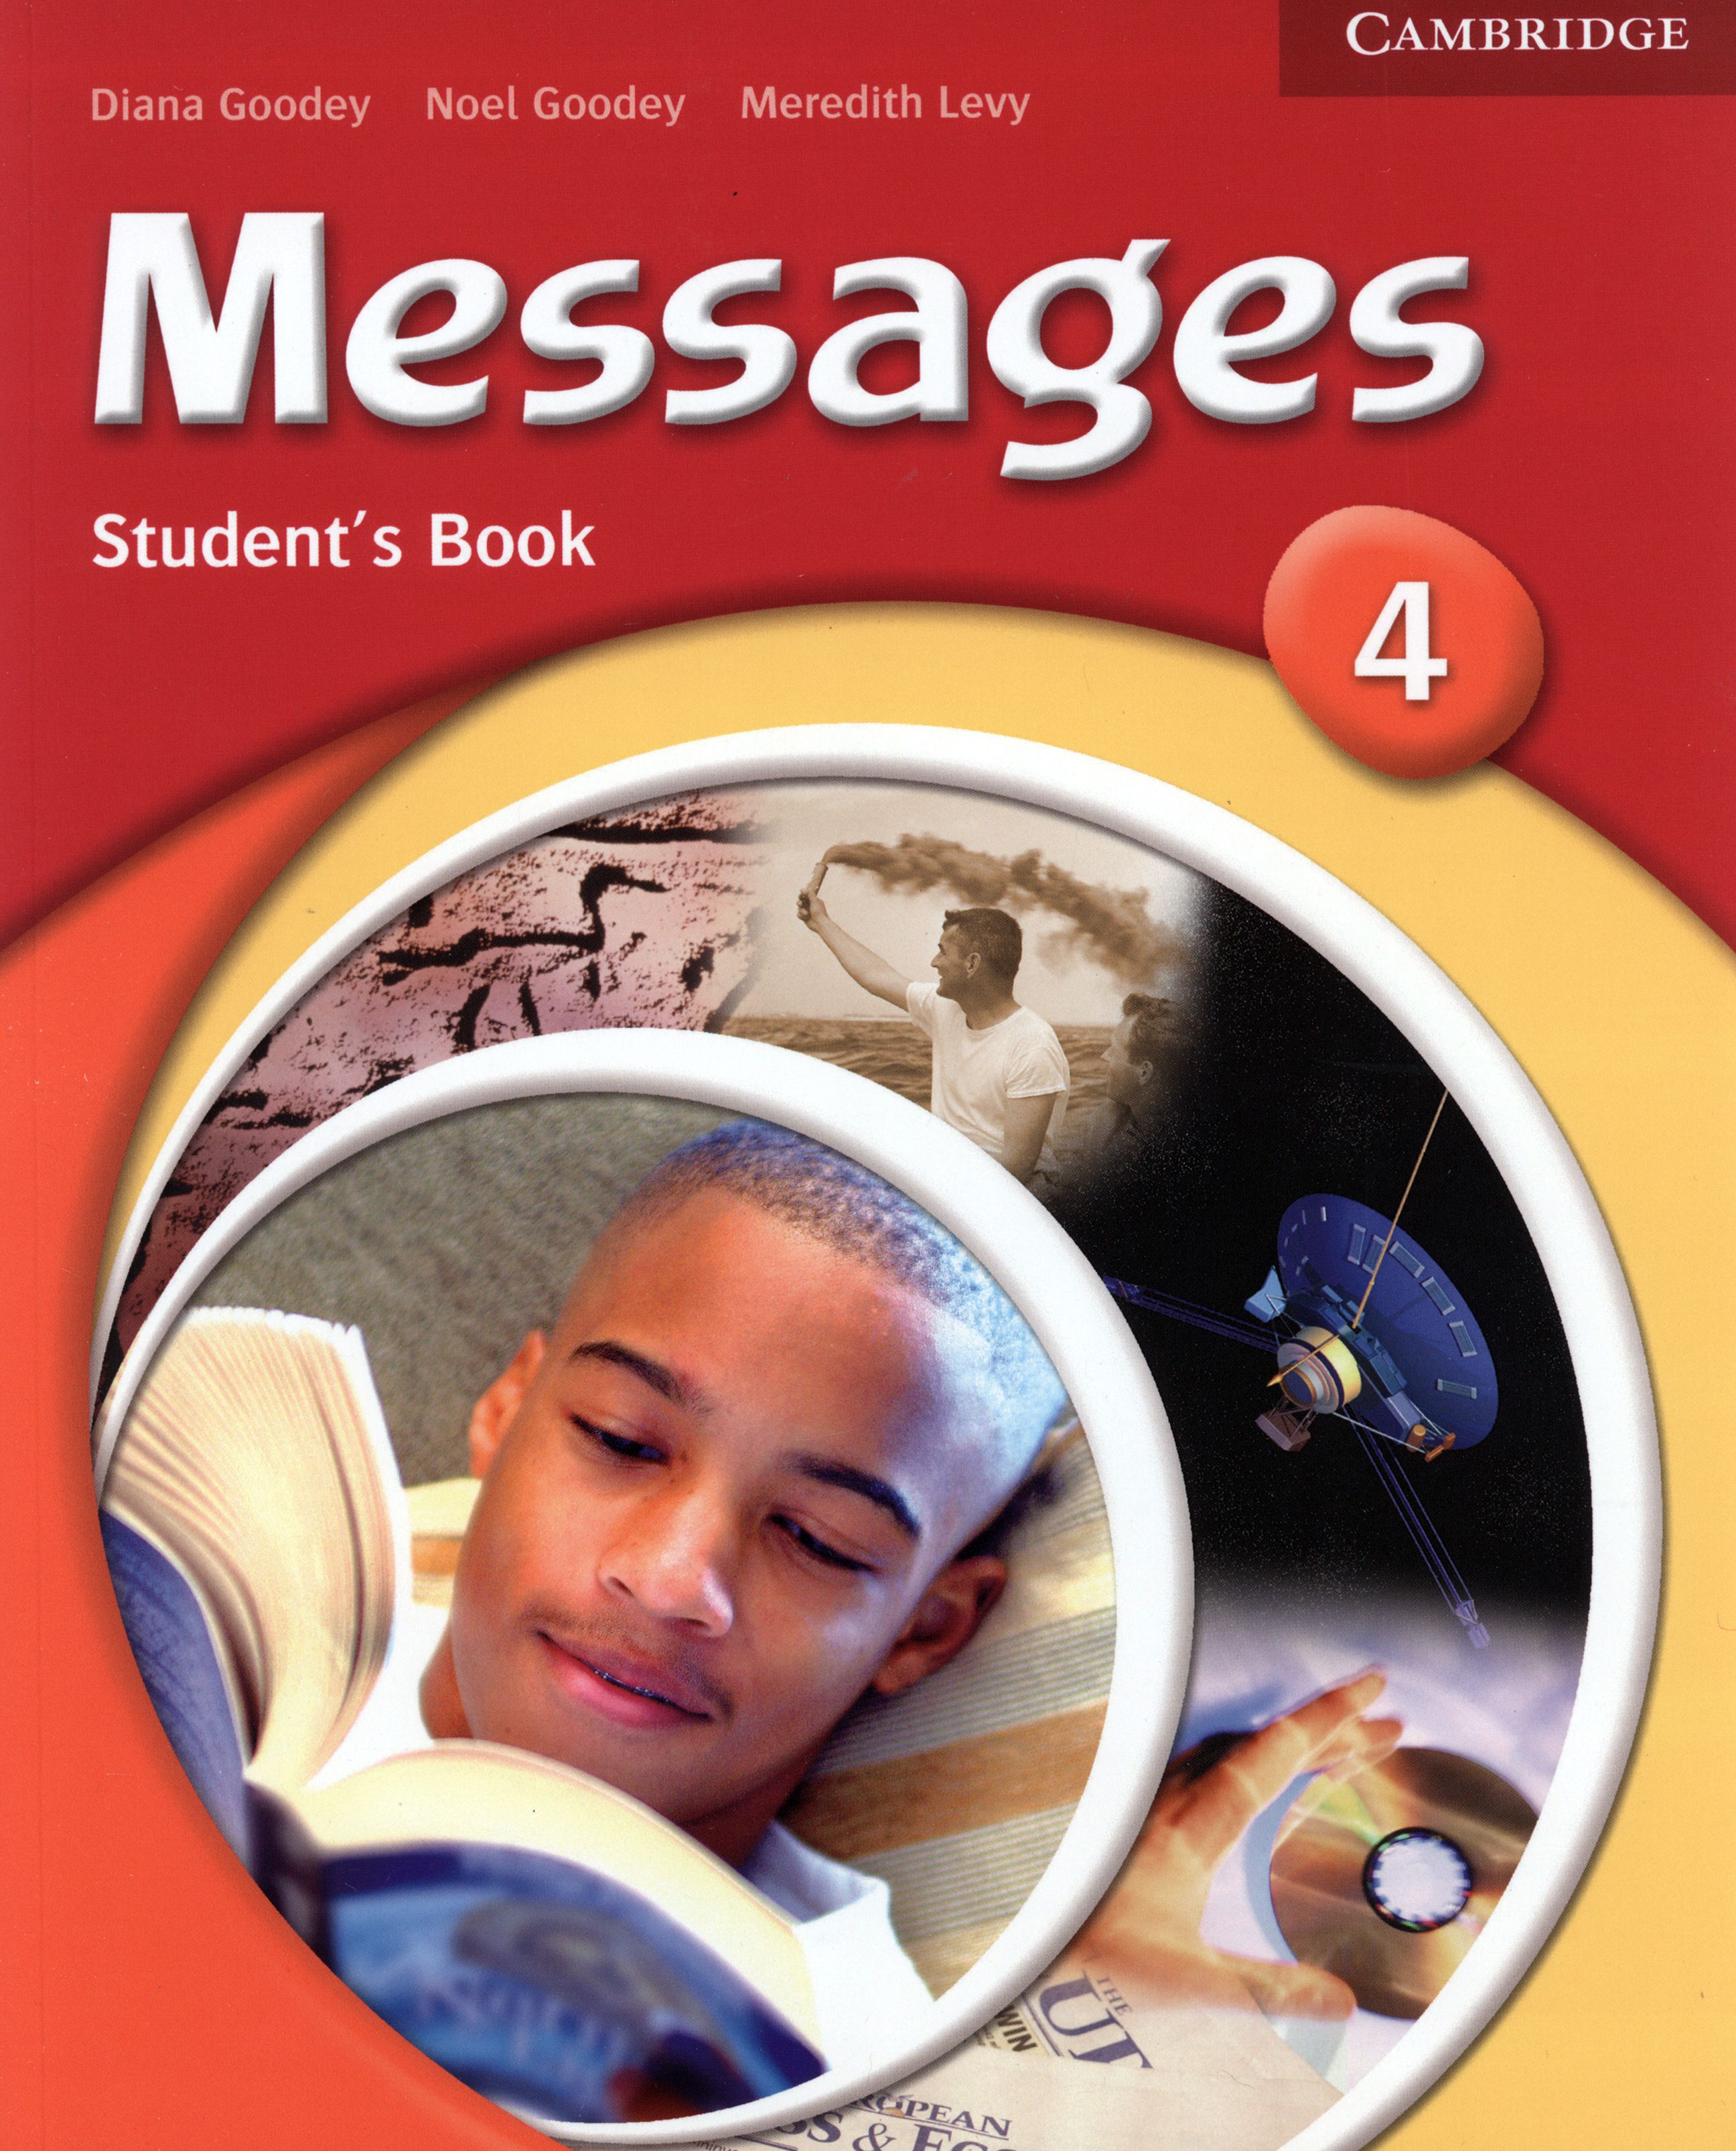 0 4 messages. Messages 4 student's book. Messages учебник. Messages 2 student’s book. Messages 1 student’s book.